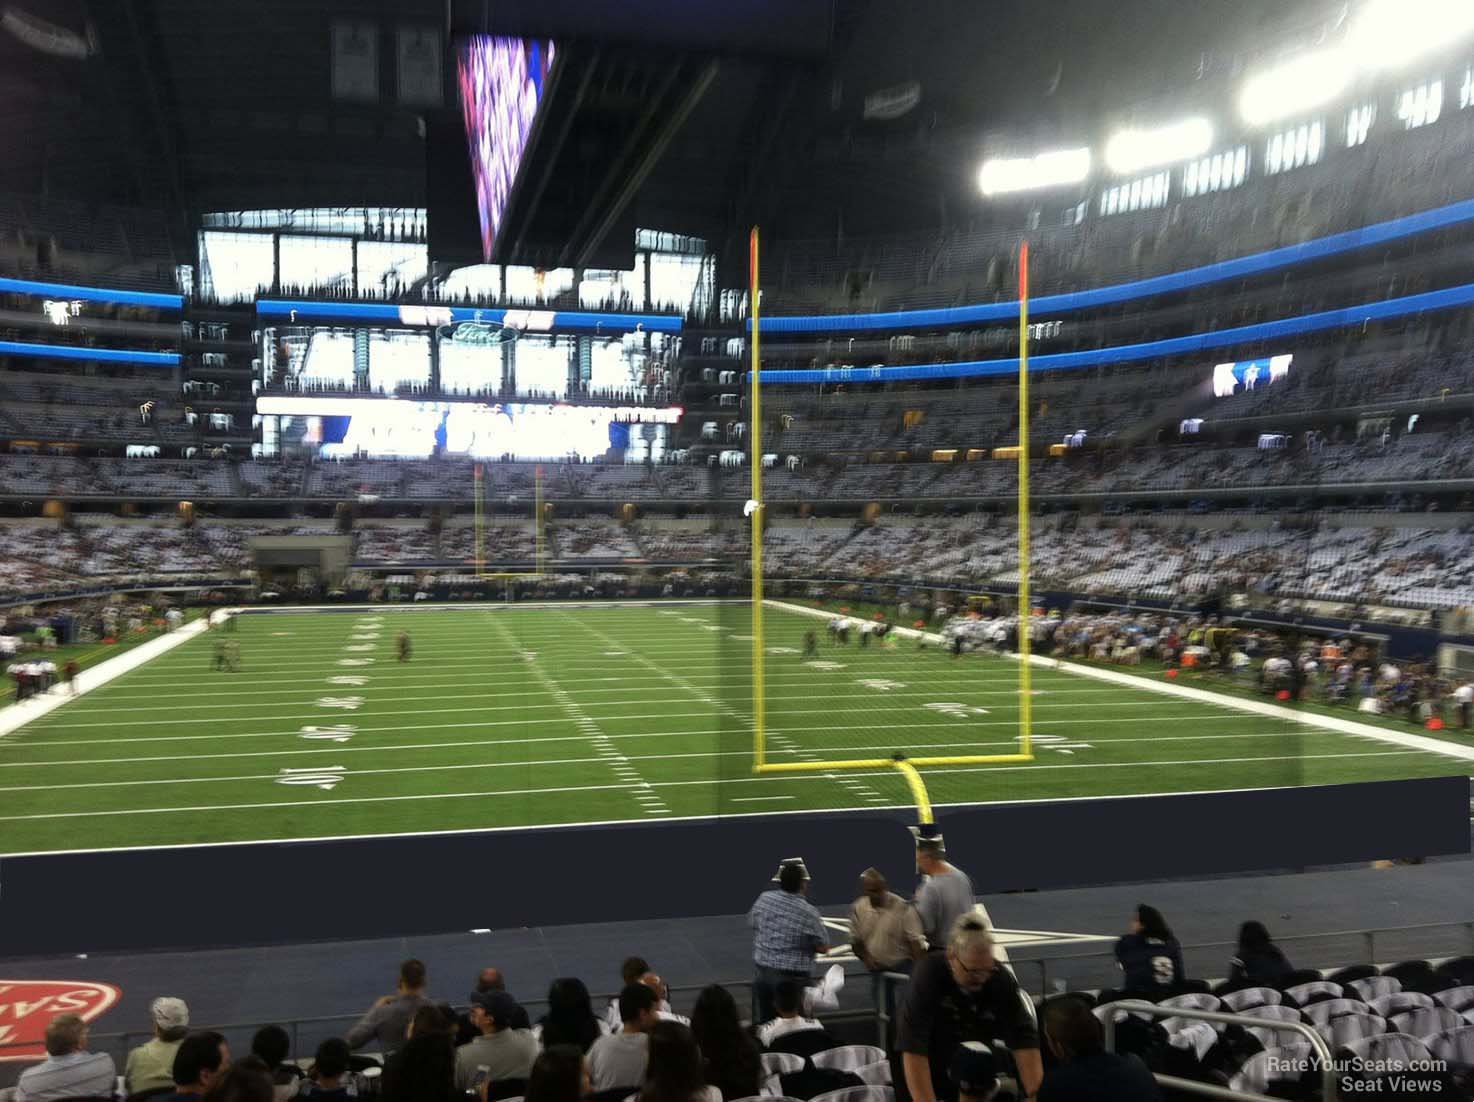 section 124, row 20 seat view  for football - at&t stadium (cowboys stadium)